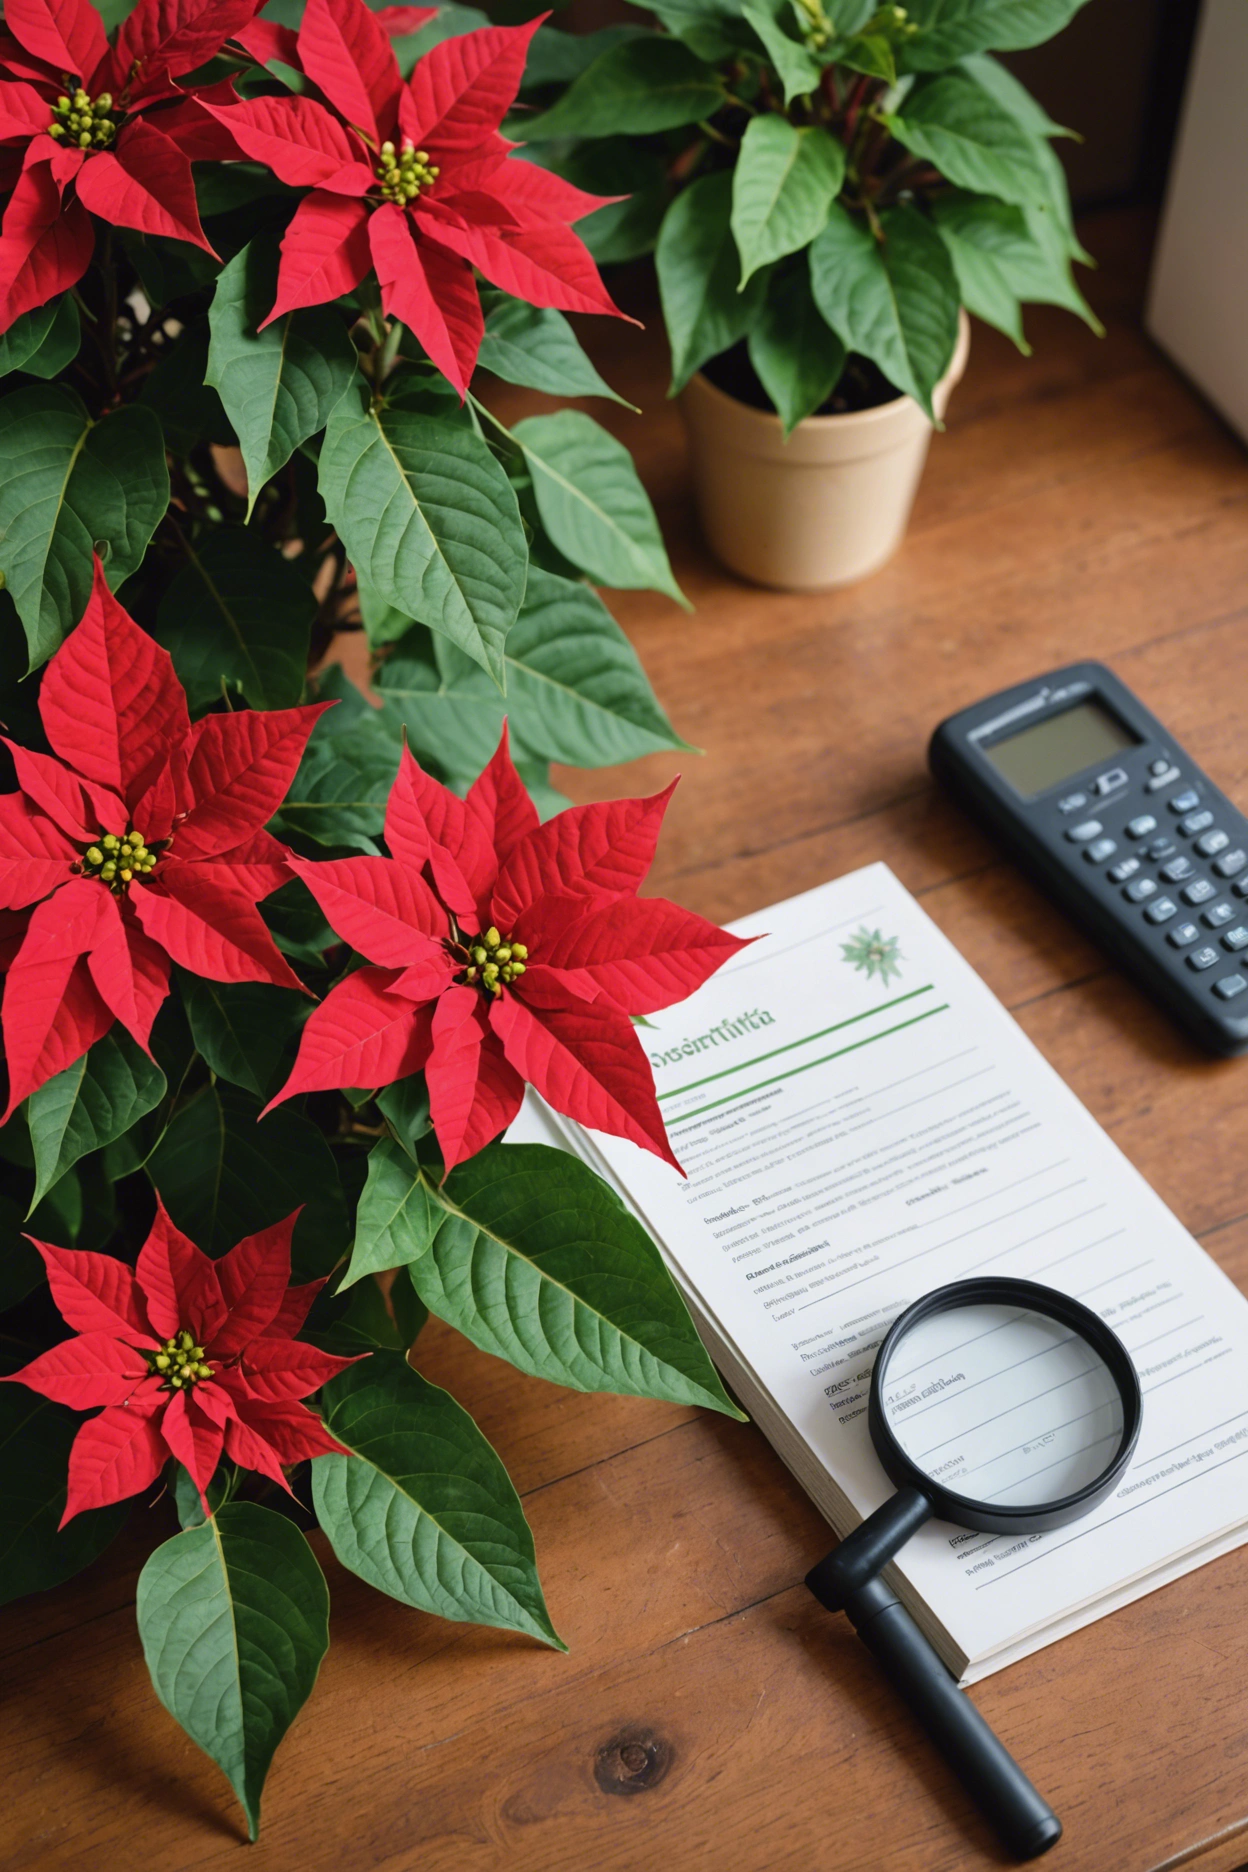 "Close-up of a poinsettia plant with vibrant red and green leaves, some wilting or falling off, with a magnifying glass and plant health guide book nearby."